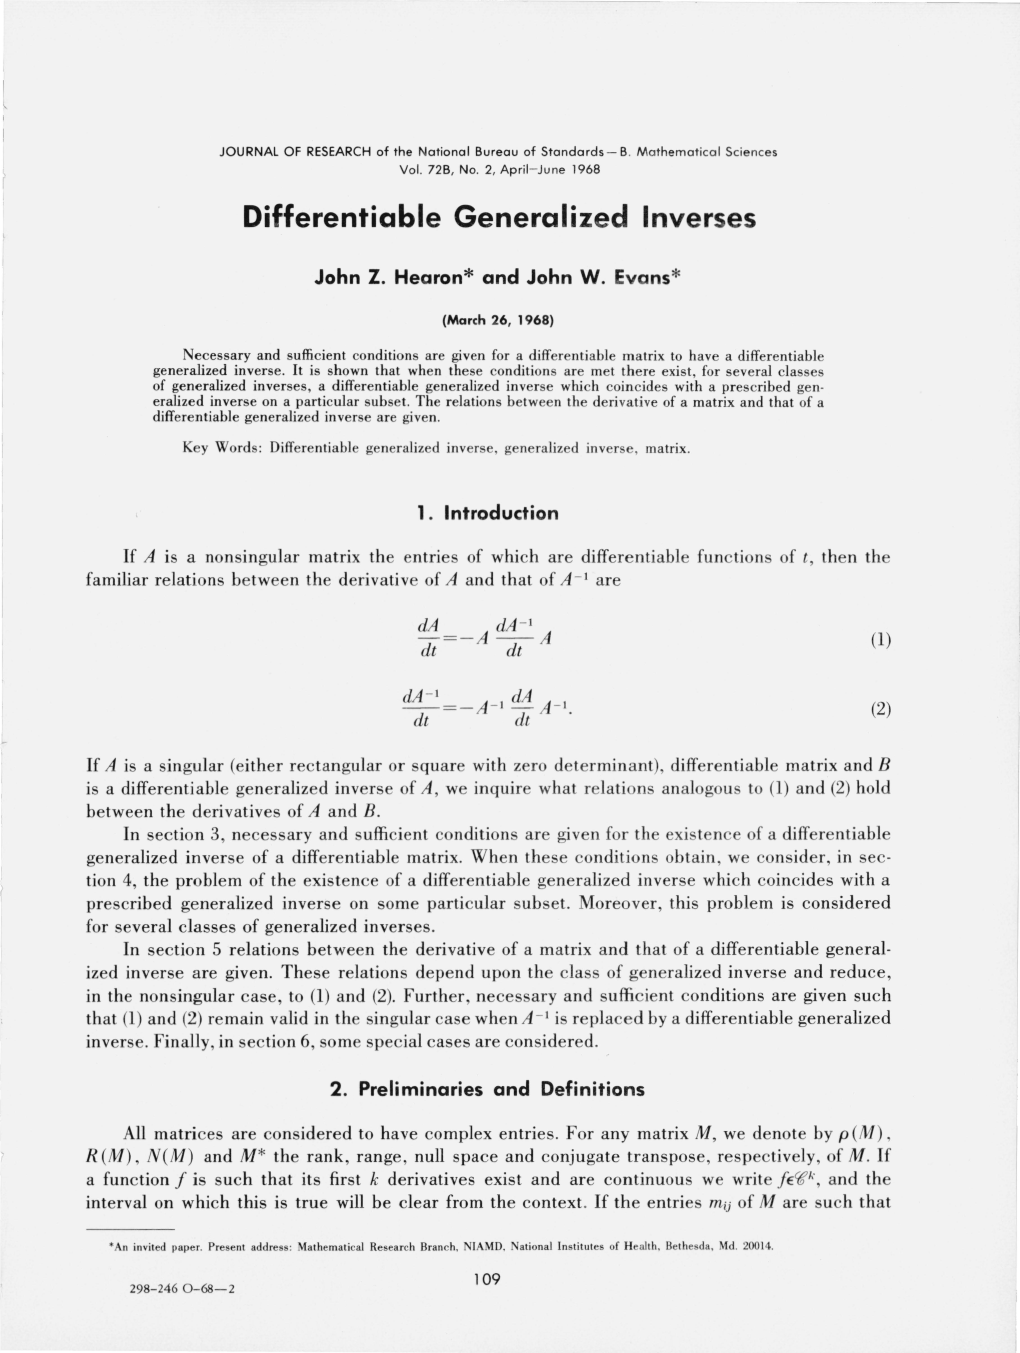 Differentiable Generalized Inverses